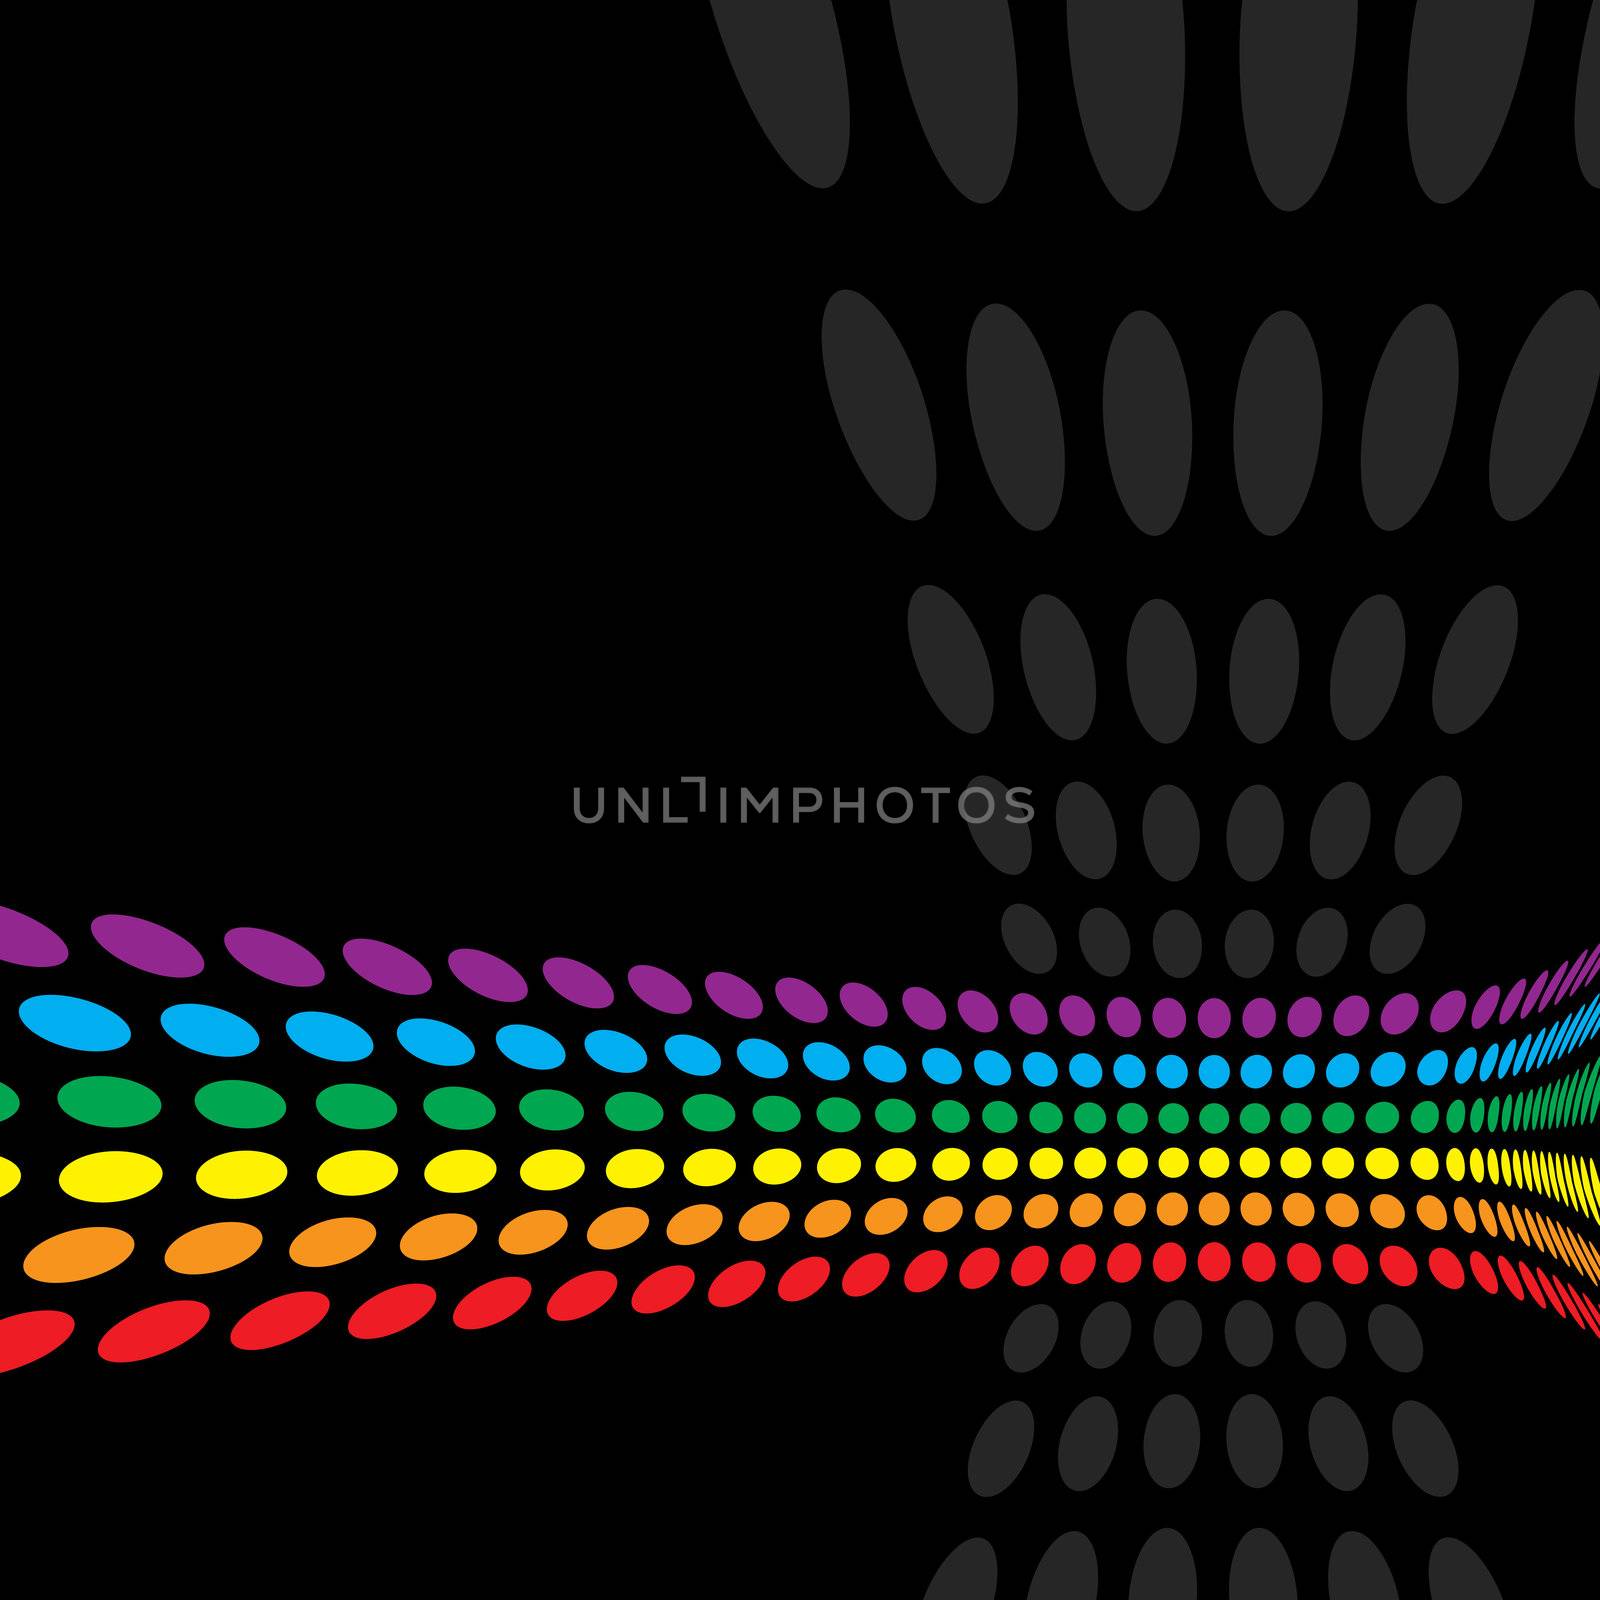 A rainbow colored abstract design template or layout.  